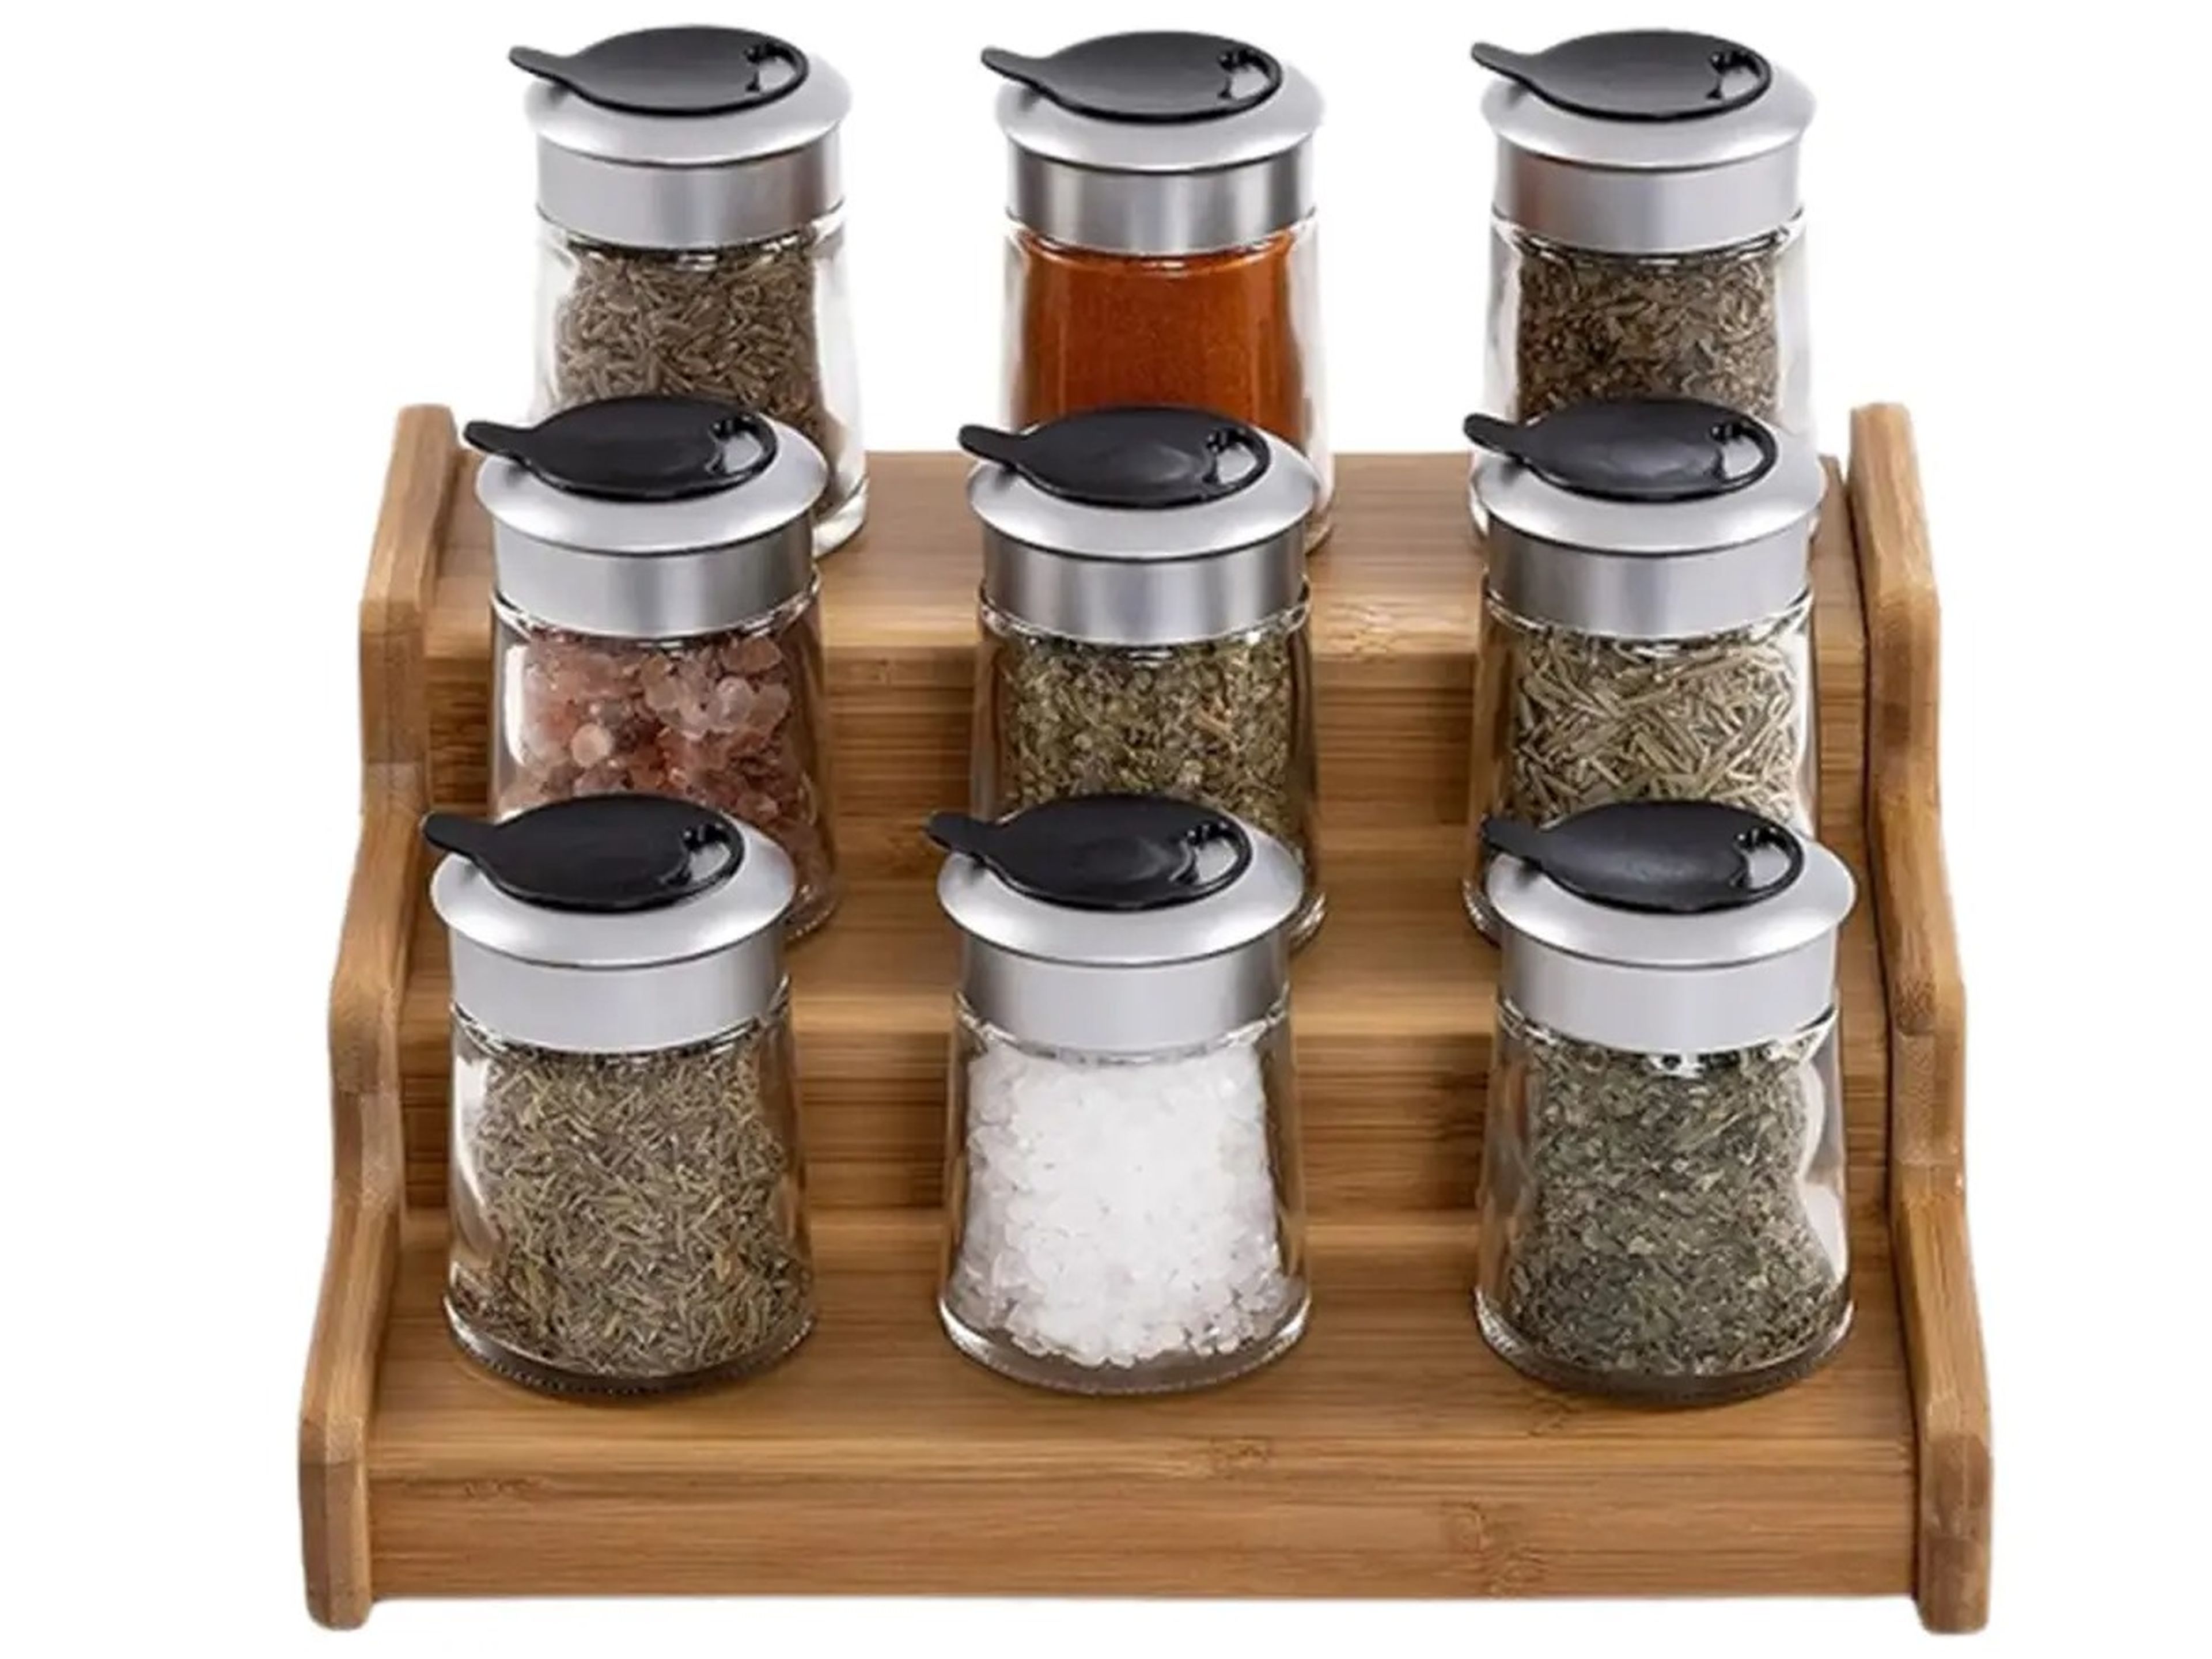 A small wooden spice rack with 9 different spices in small spice jars.